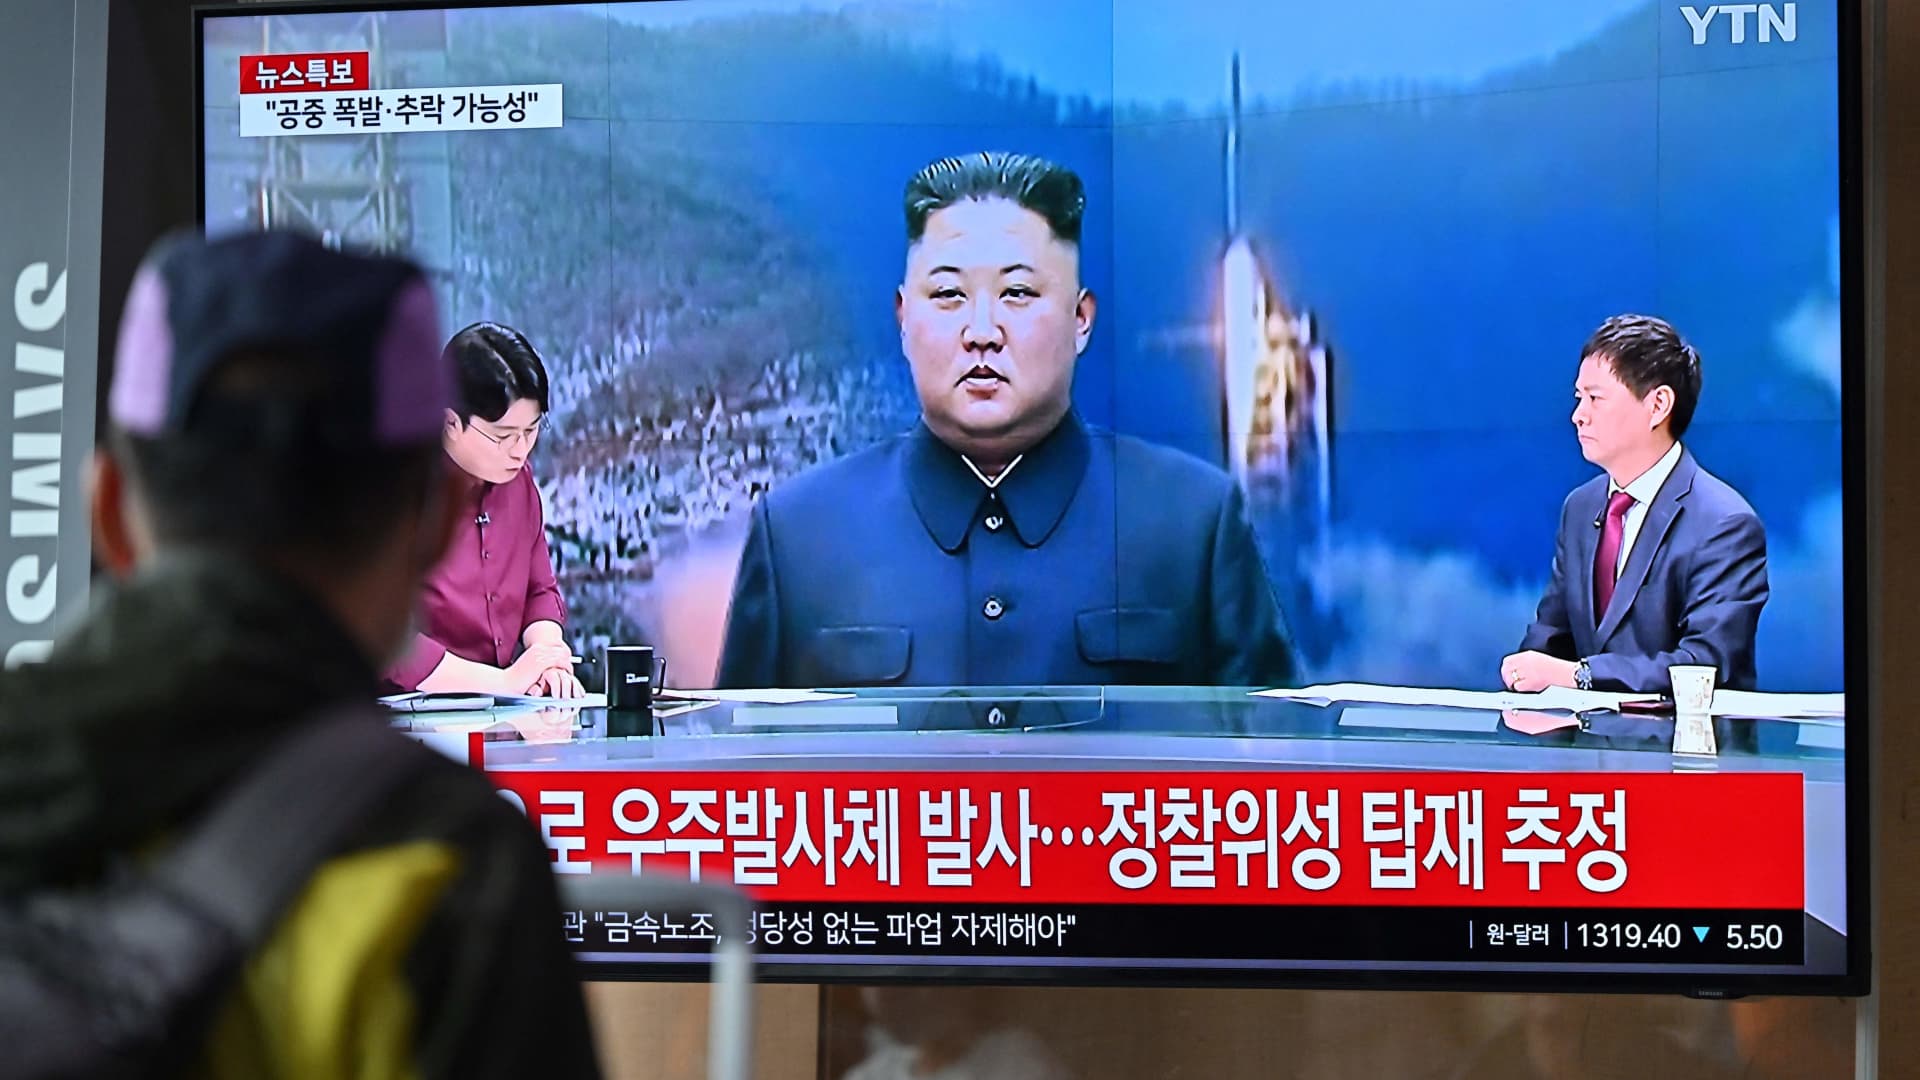 North Korea says its first spy satellite launch ends in failure, crashes into sea